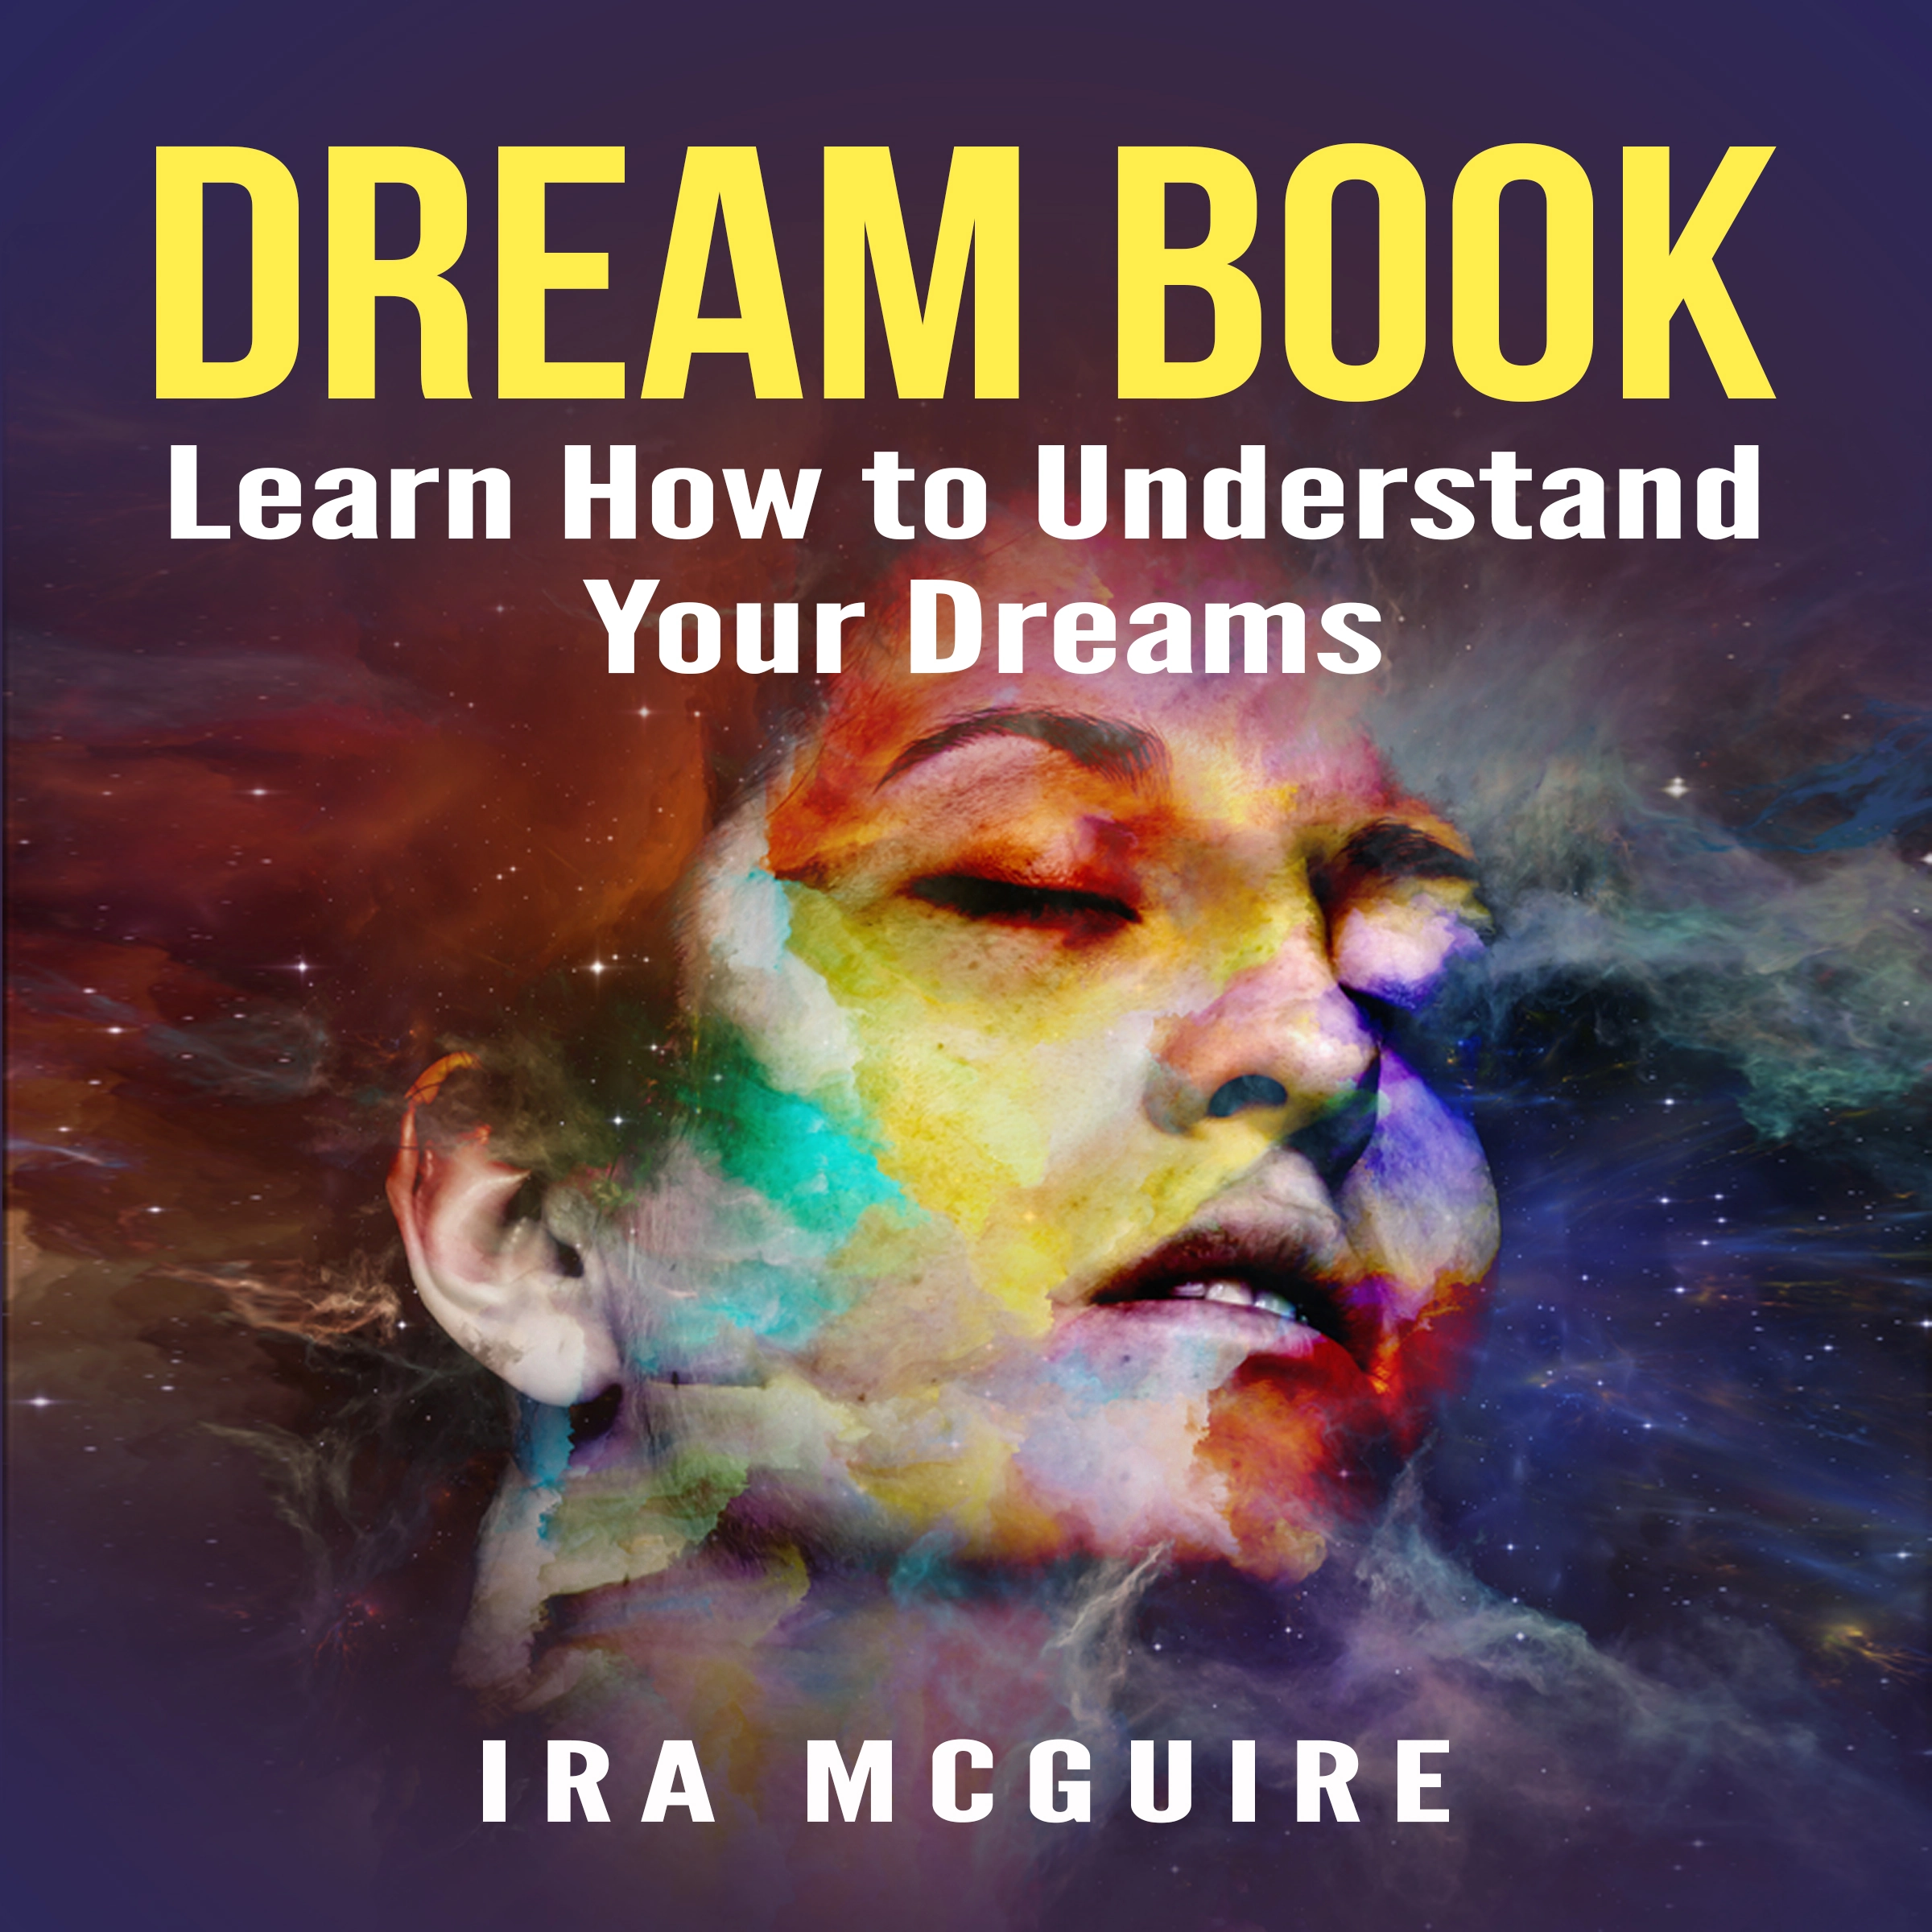 Dream Book: Learn How to Understand Your Dreams Audiobook by Ira Mcguire